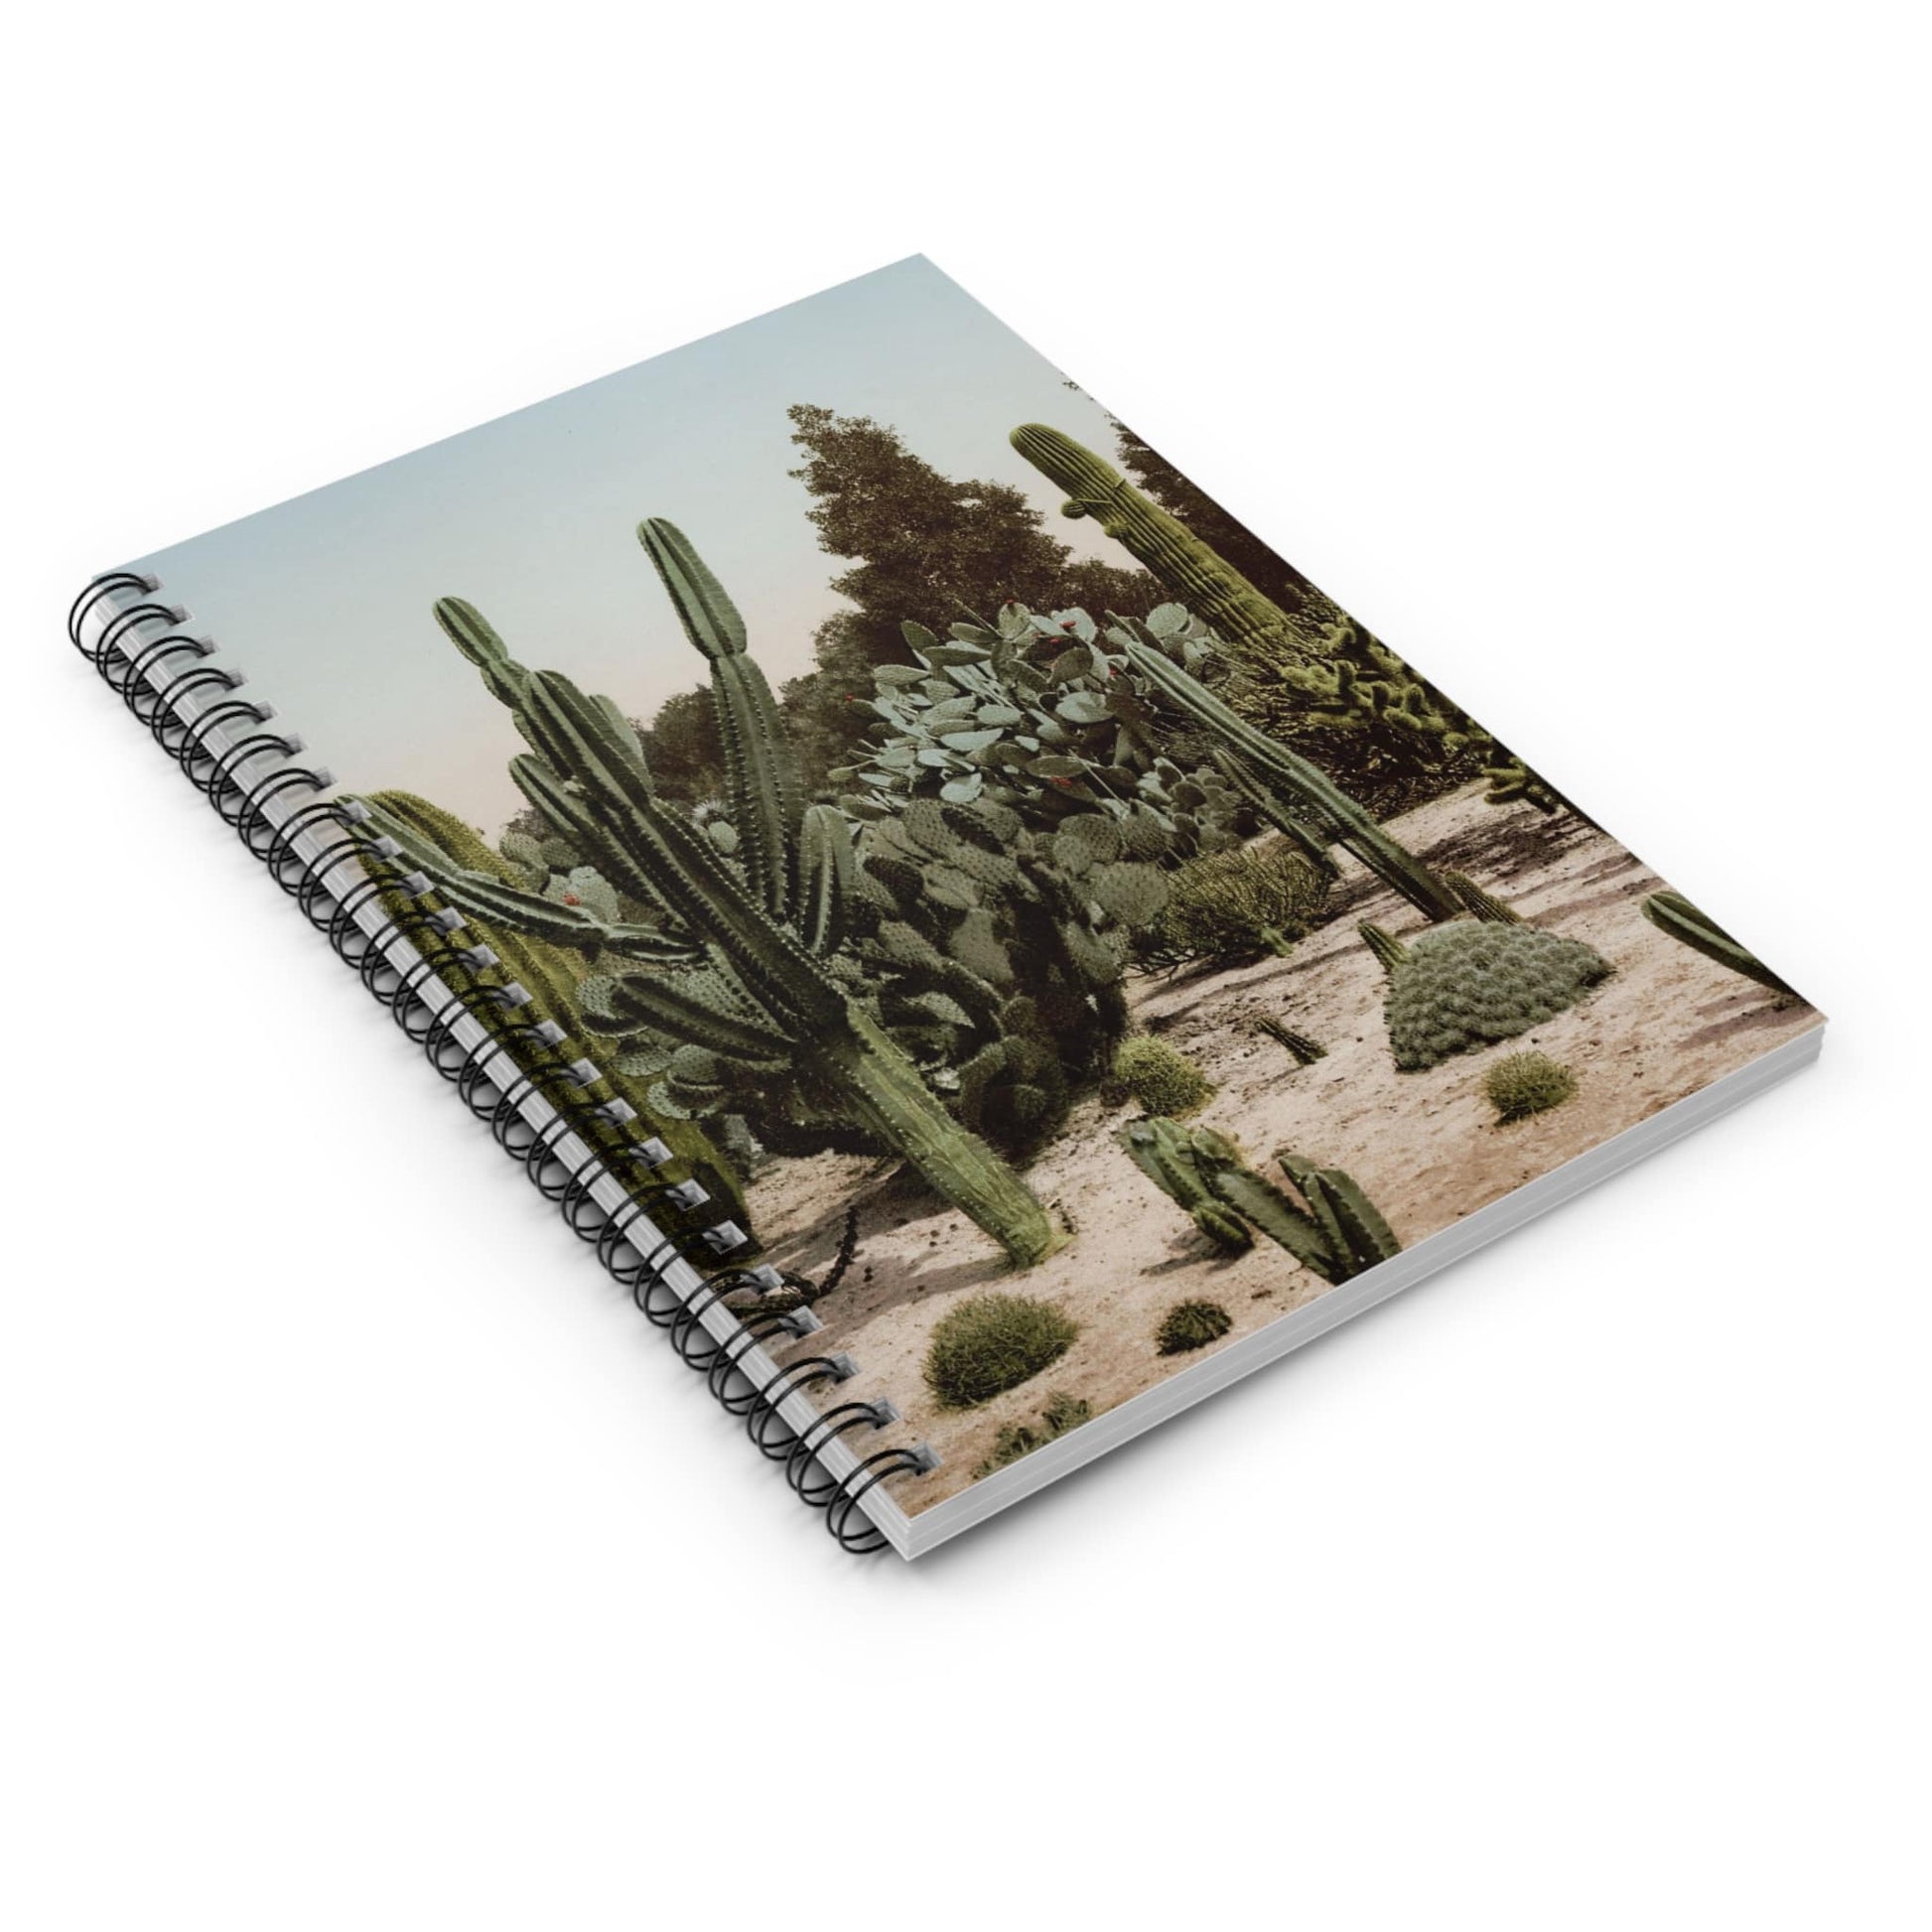 Desert Landscape Spiral Notebook Laying Flat on White Surface